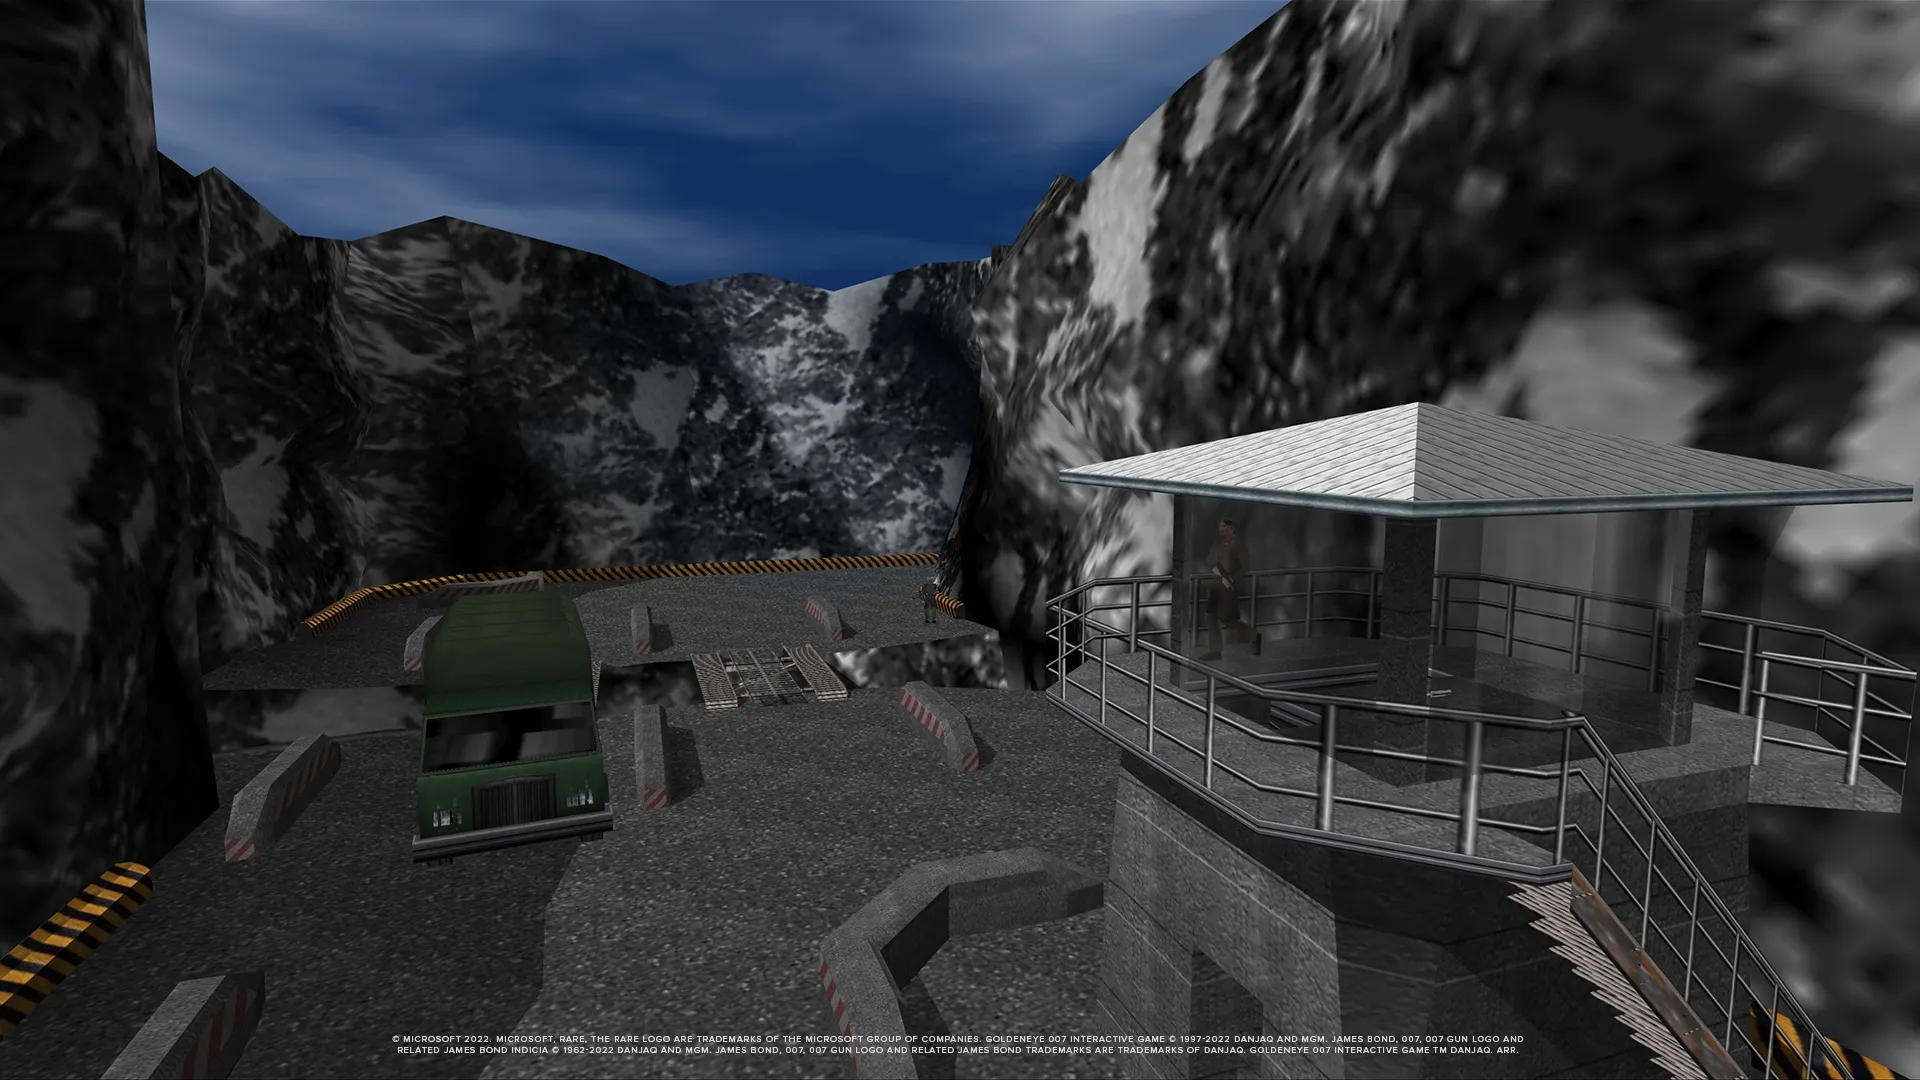 A view of the dam level recreated in GoldenEye